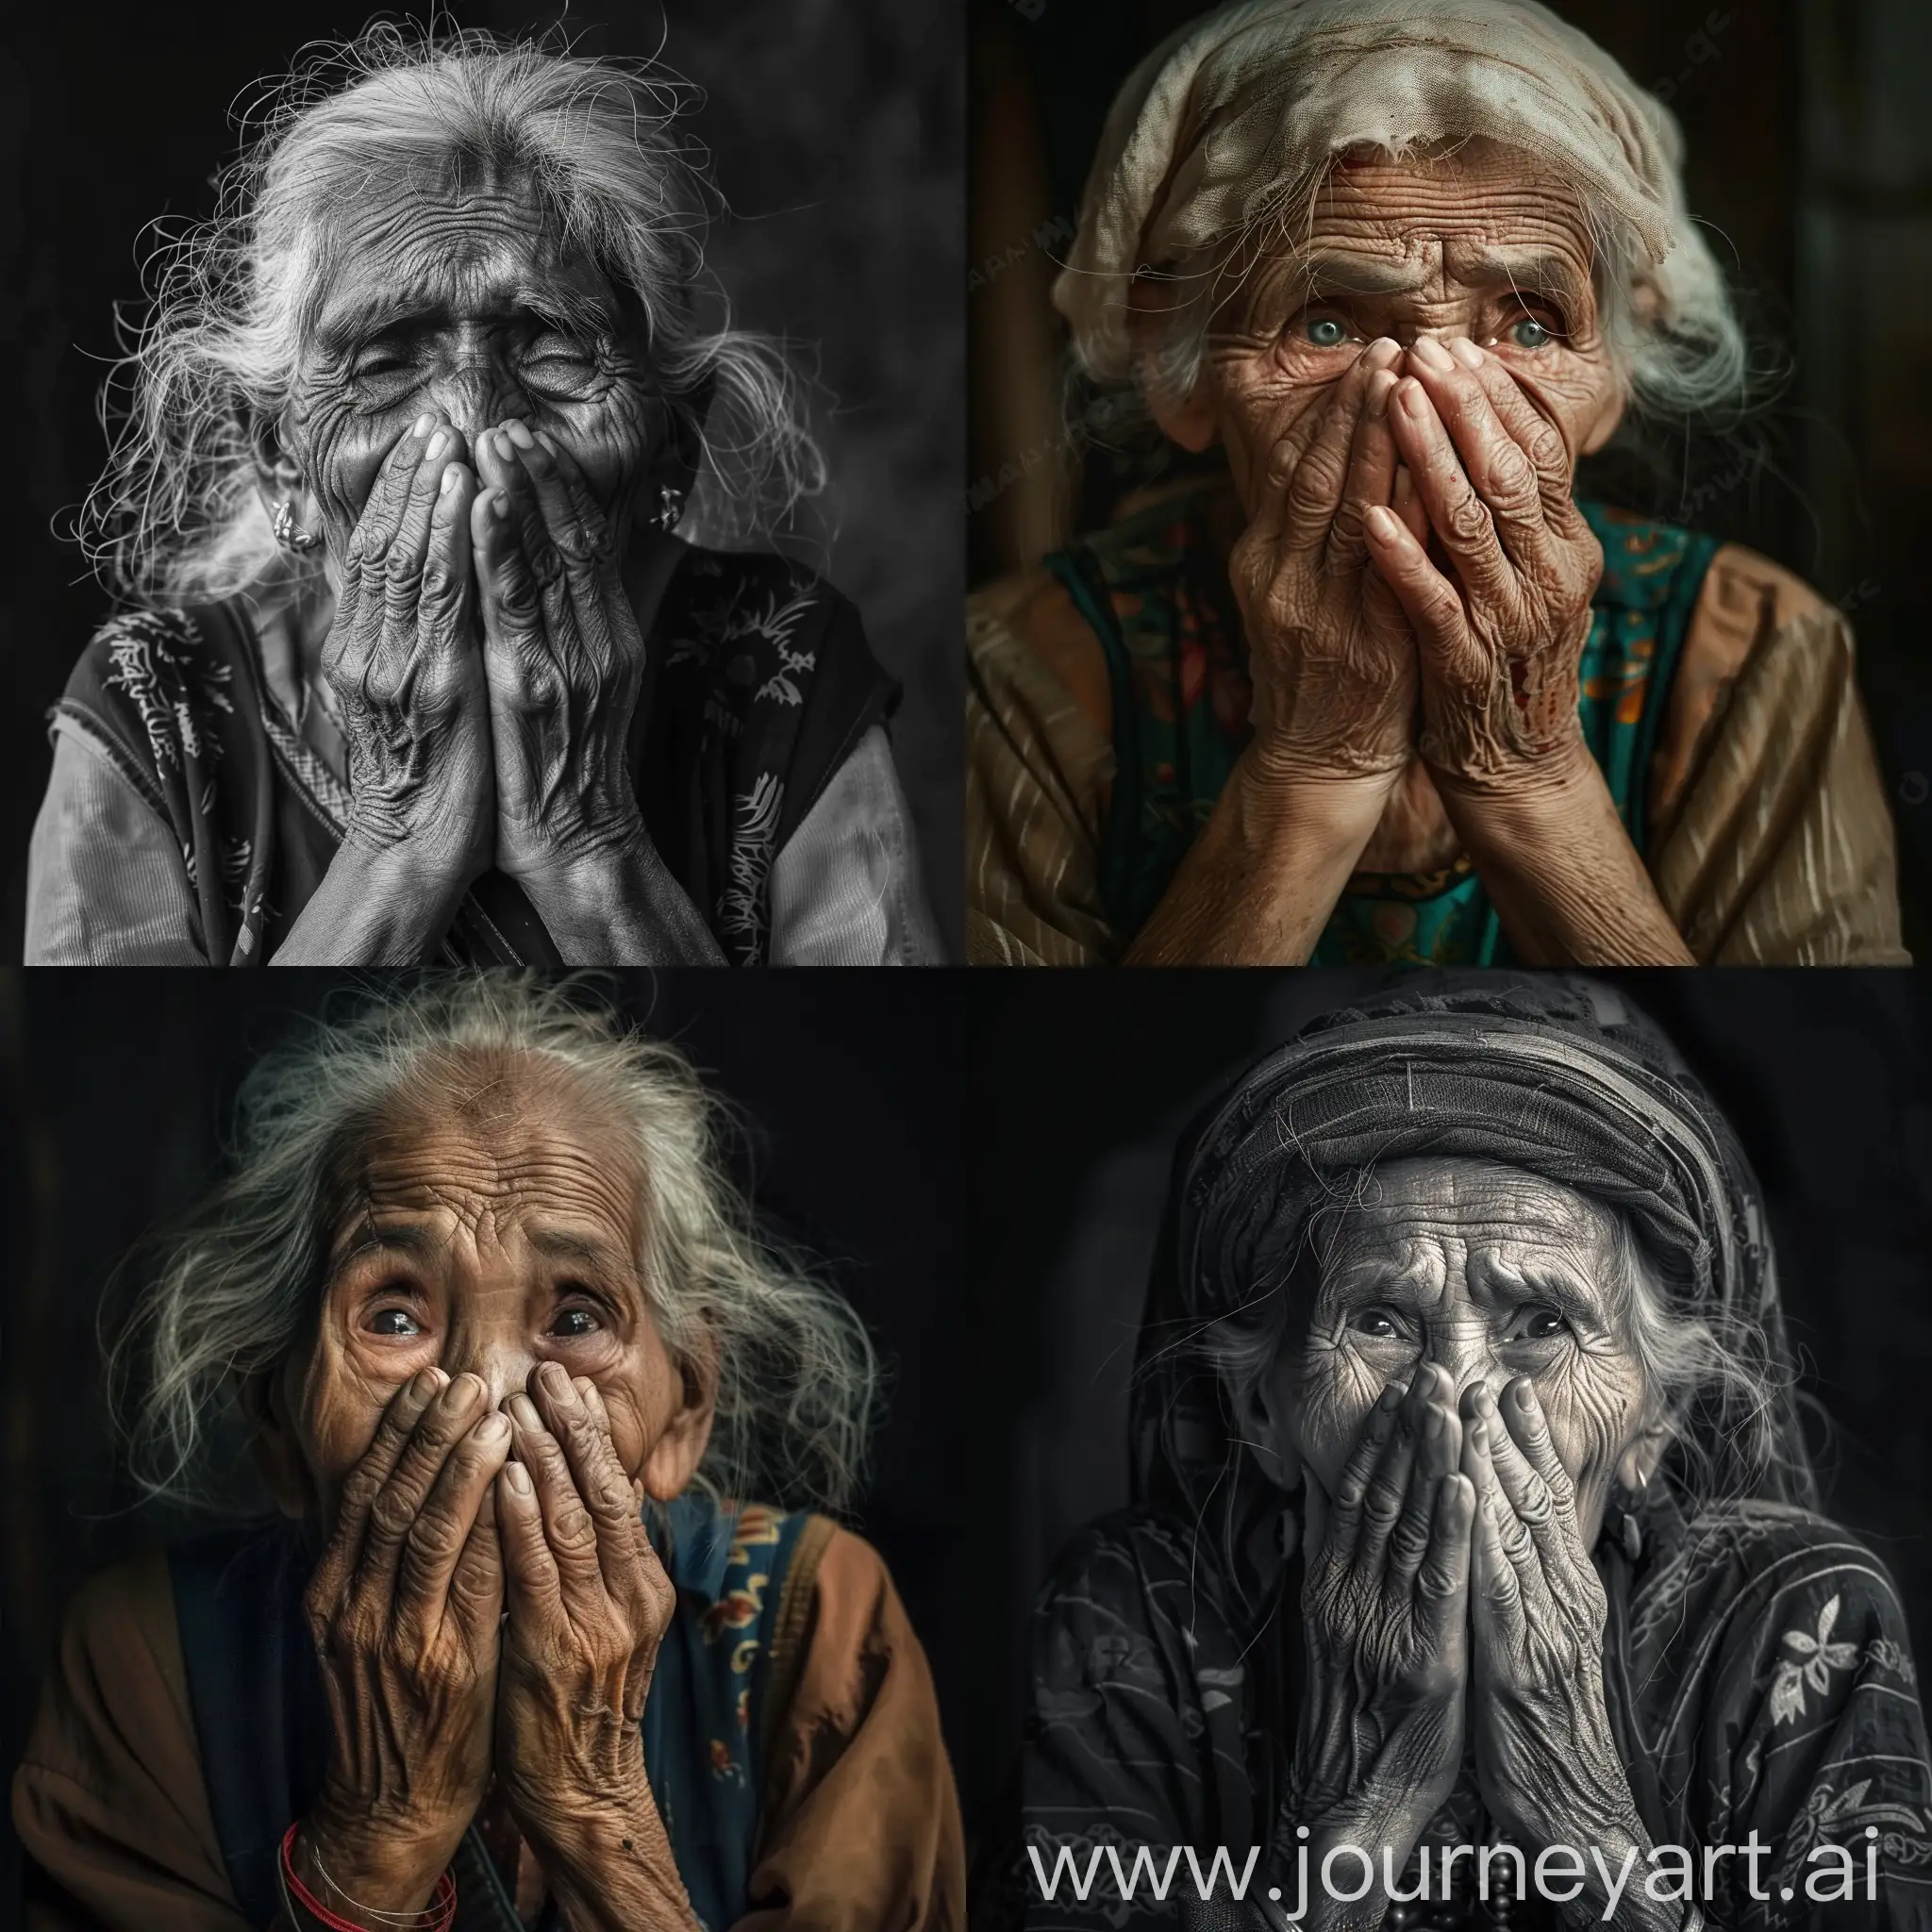 old woman covers her mouth with her hands, a positive photo